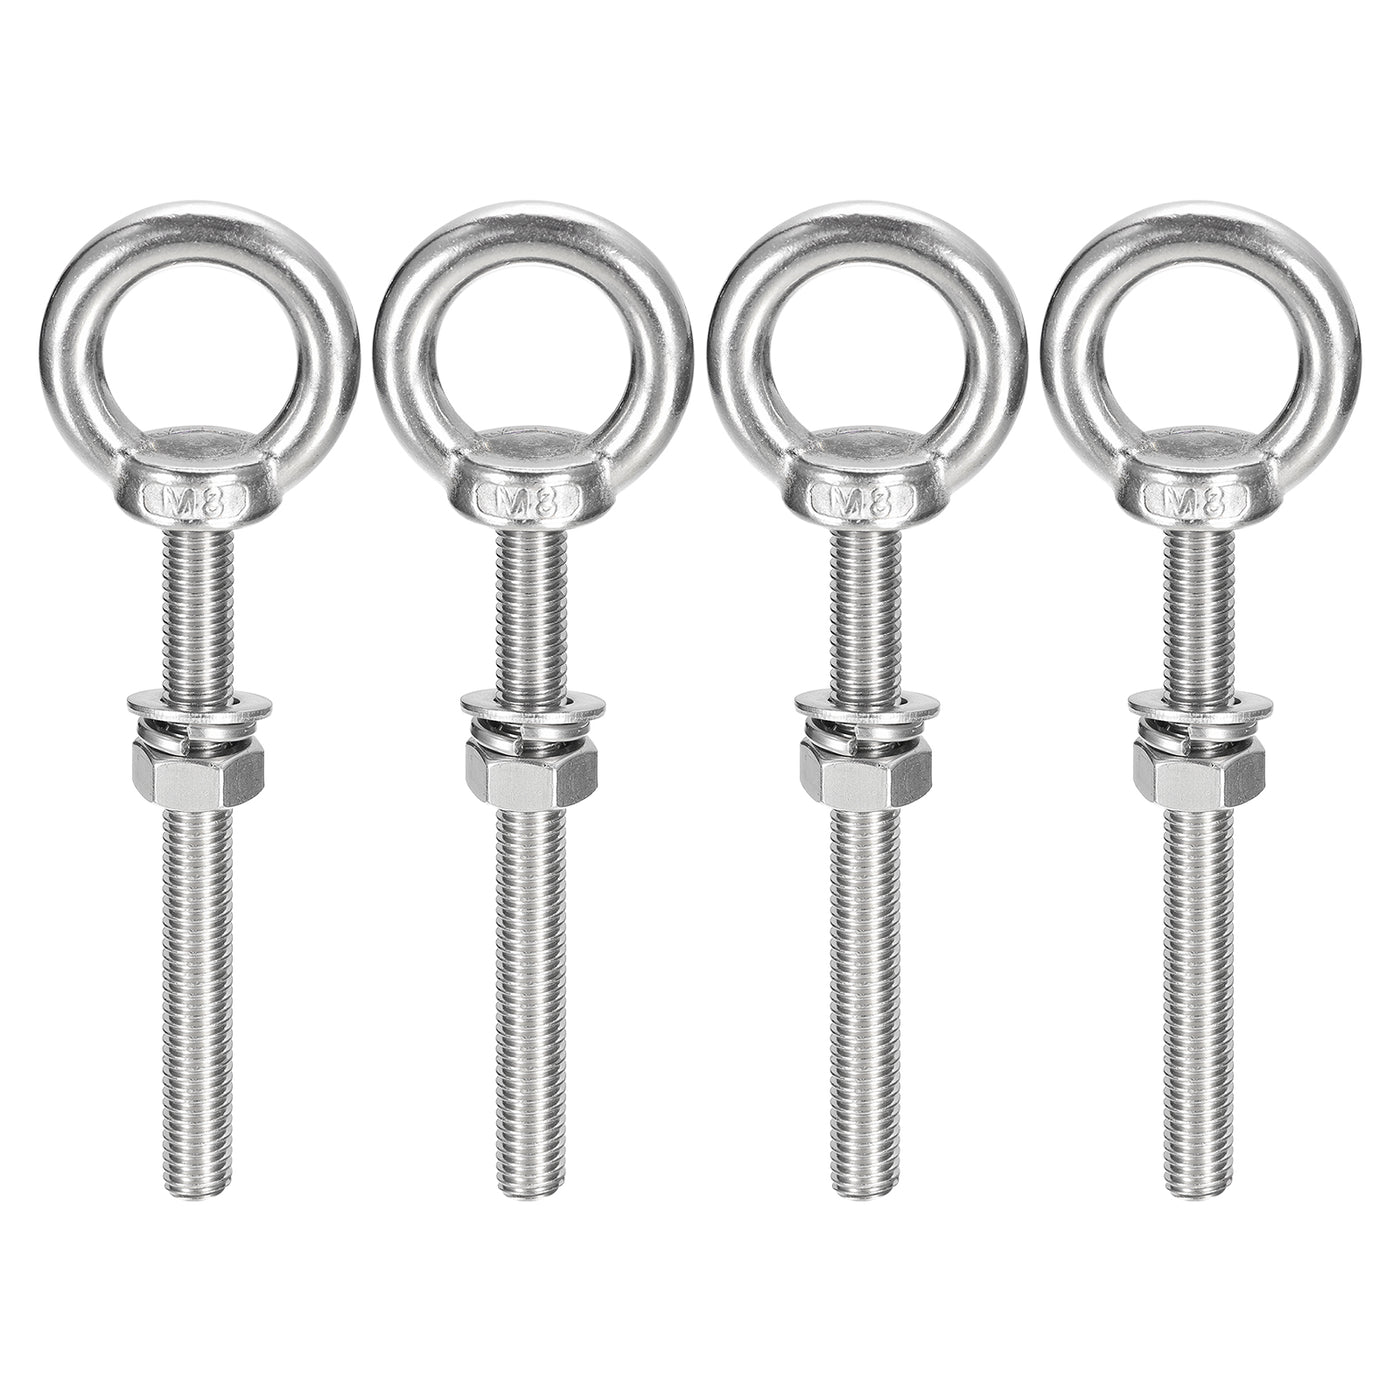 uxcell Uxcell Lifting Eye Bolt, 4 Sets M8x80mm Eye Bolt with Nut Washer 304 Stainless Steel